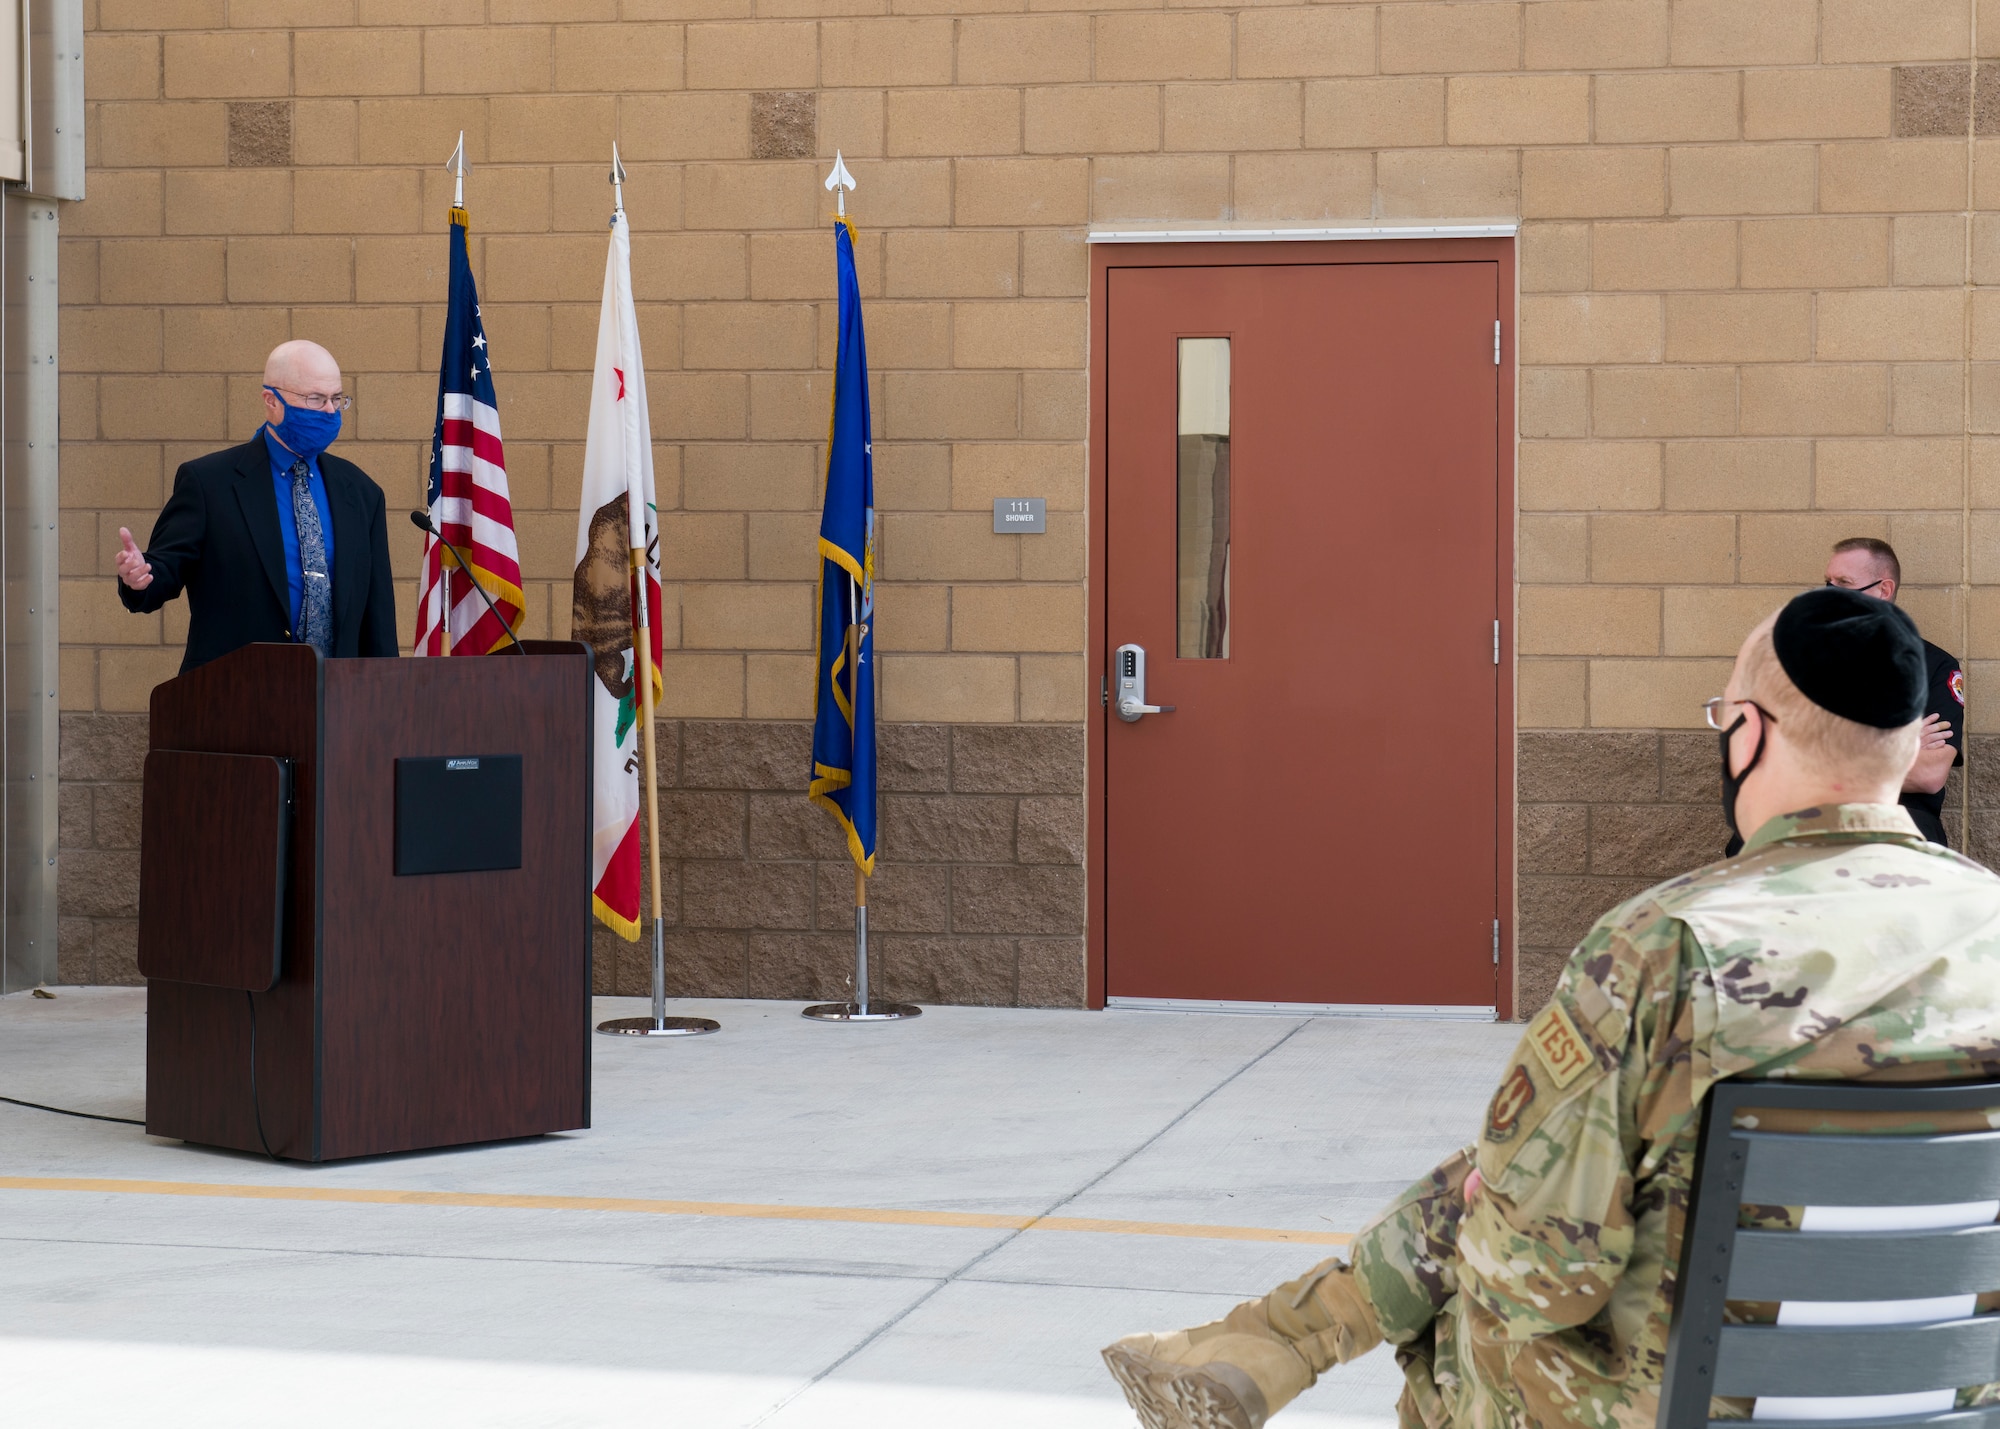 James Judkins, 412th Civil Engineer Group director, provides his remarks during the ribbon-cutting ceremony for the new Airfield Fire Station at Edwards Air Force Base, California, Dec. 8. (Air Force photo by Giancarlo Casem)